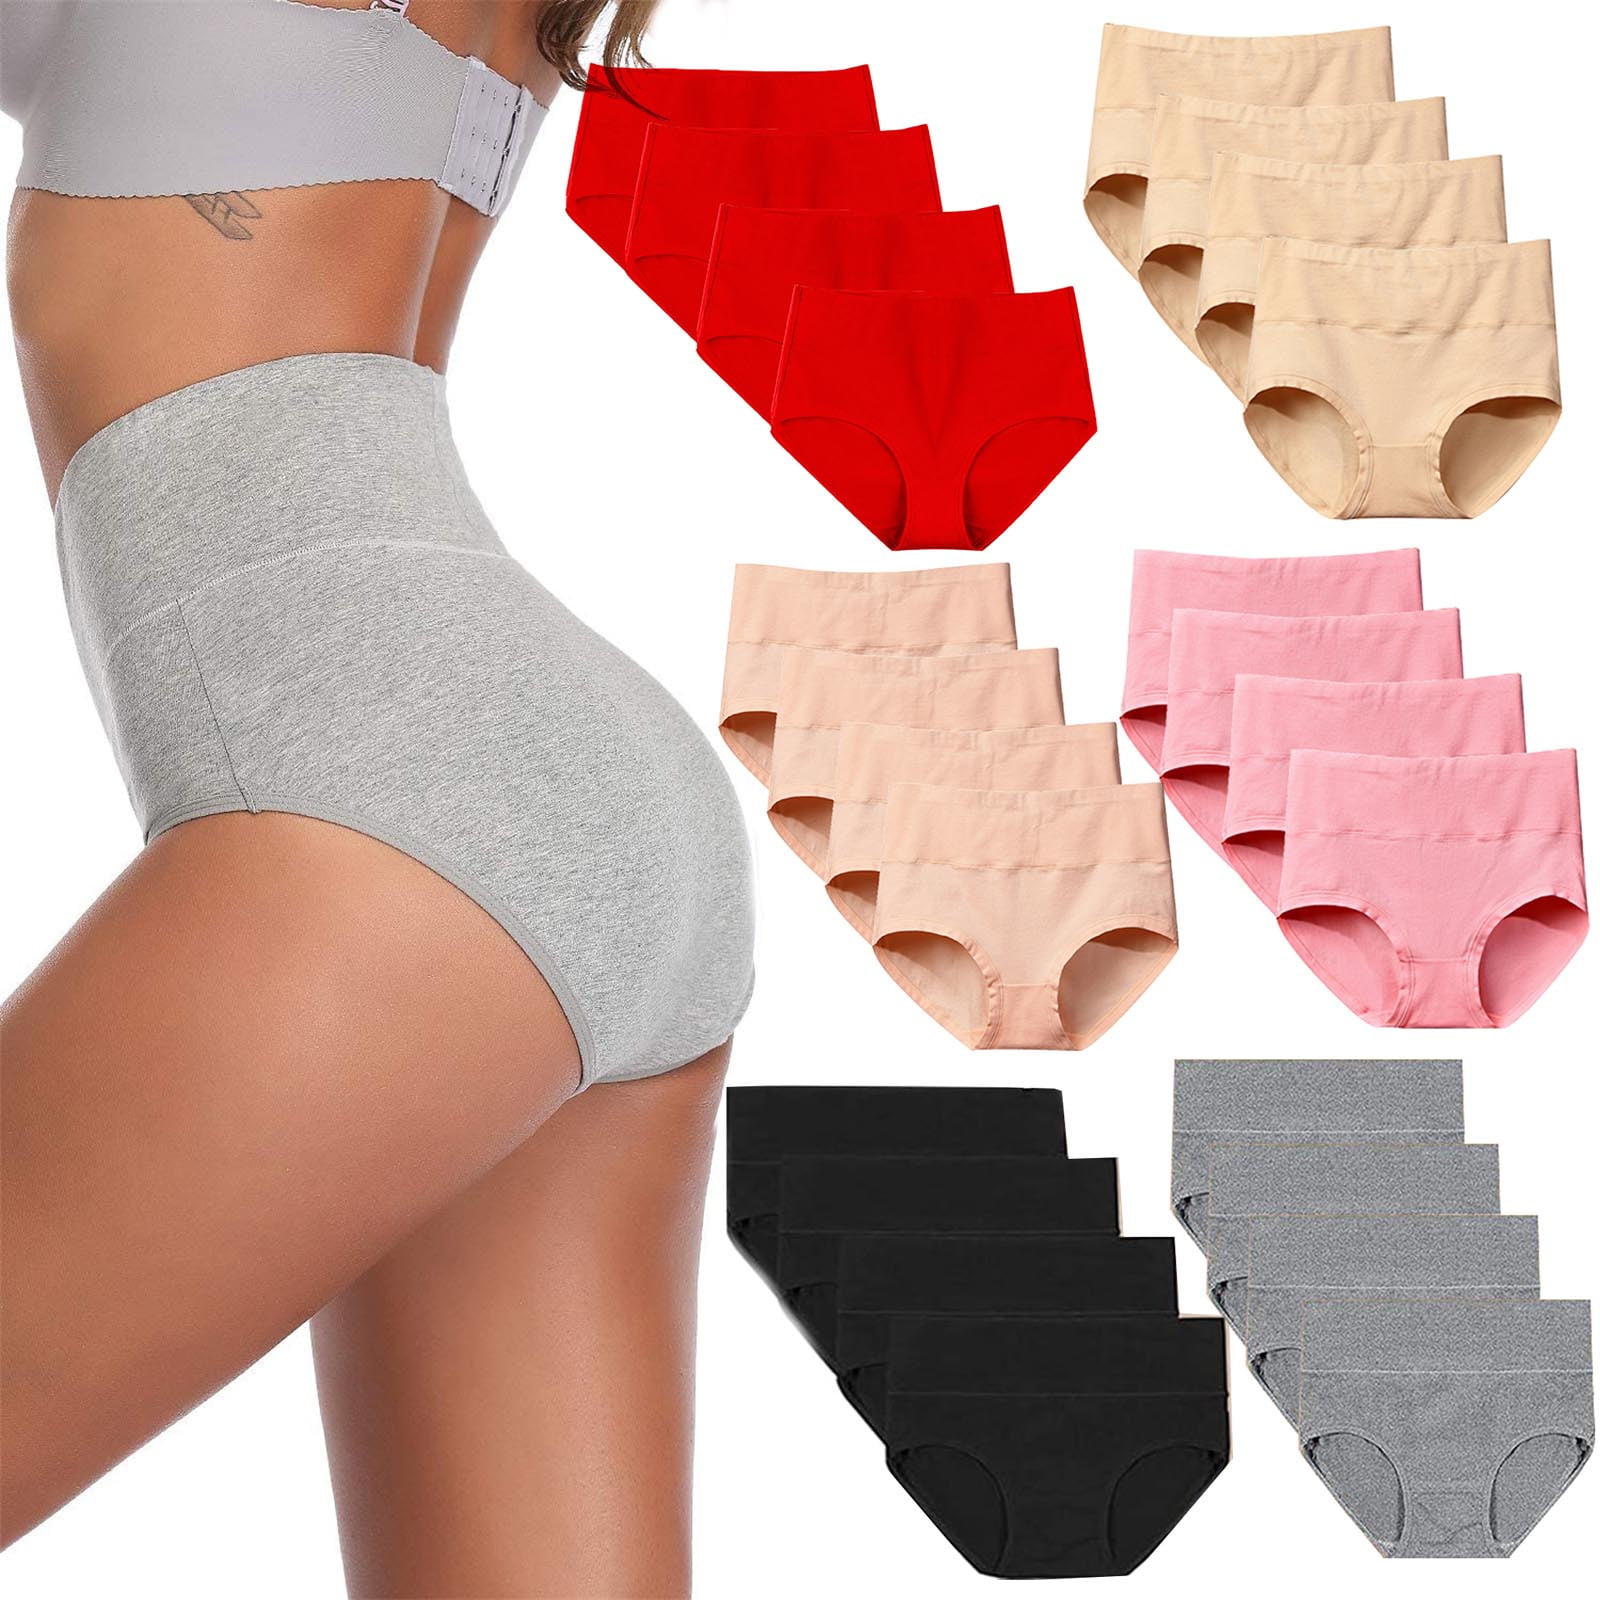 Sksloeg Panties for Women Breathable High Middle Waist Solid Color Panties  Cotton Soft Breathable Stretch period Briefs Seamless Ladies Underwear